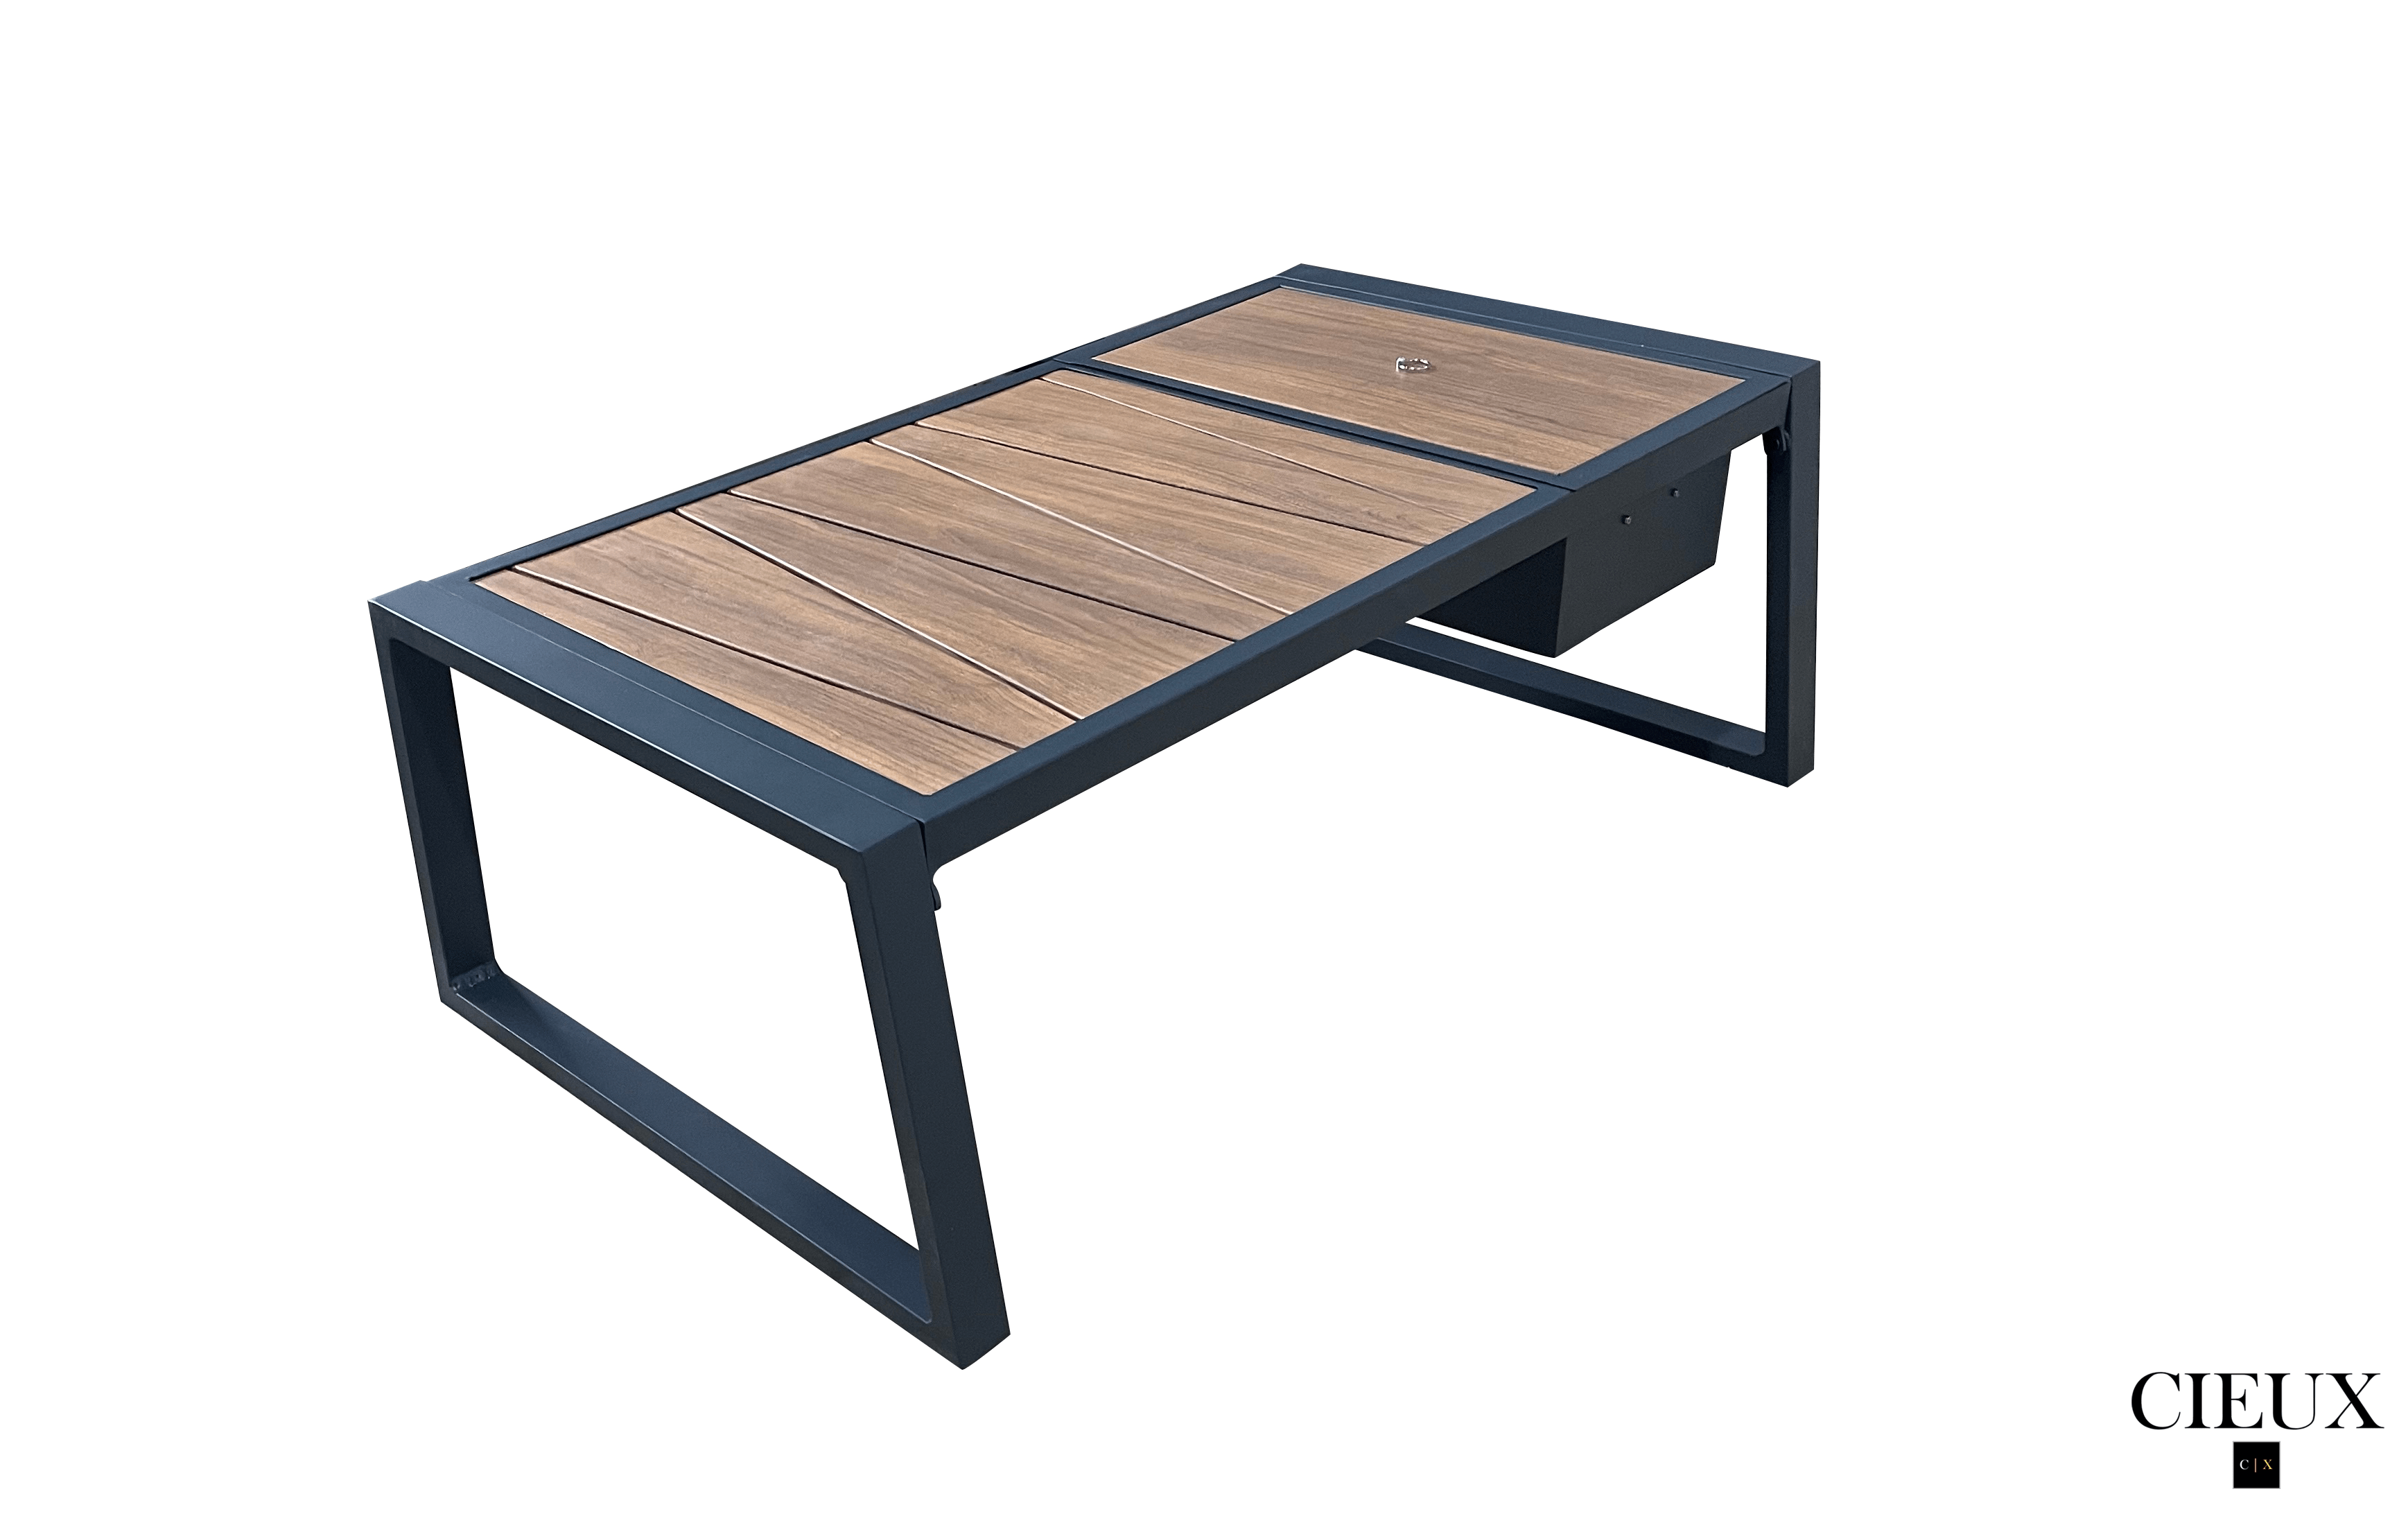 CIEUX Coffee Table Avignon Outdoor Patio Aluminum Metal Coffee Table in Black